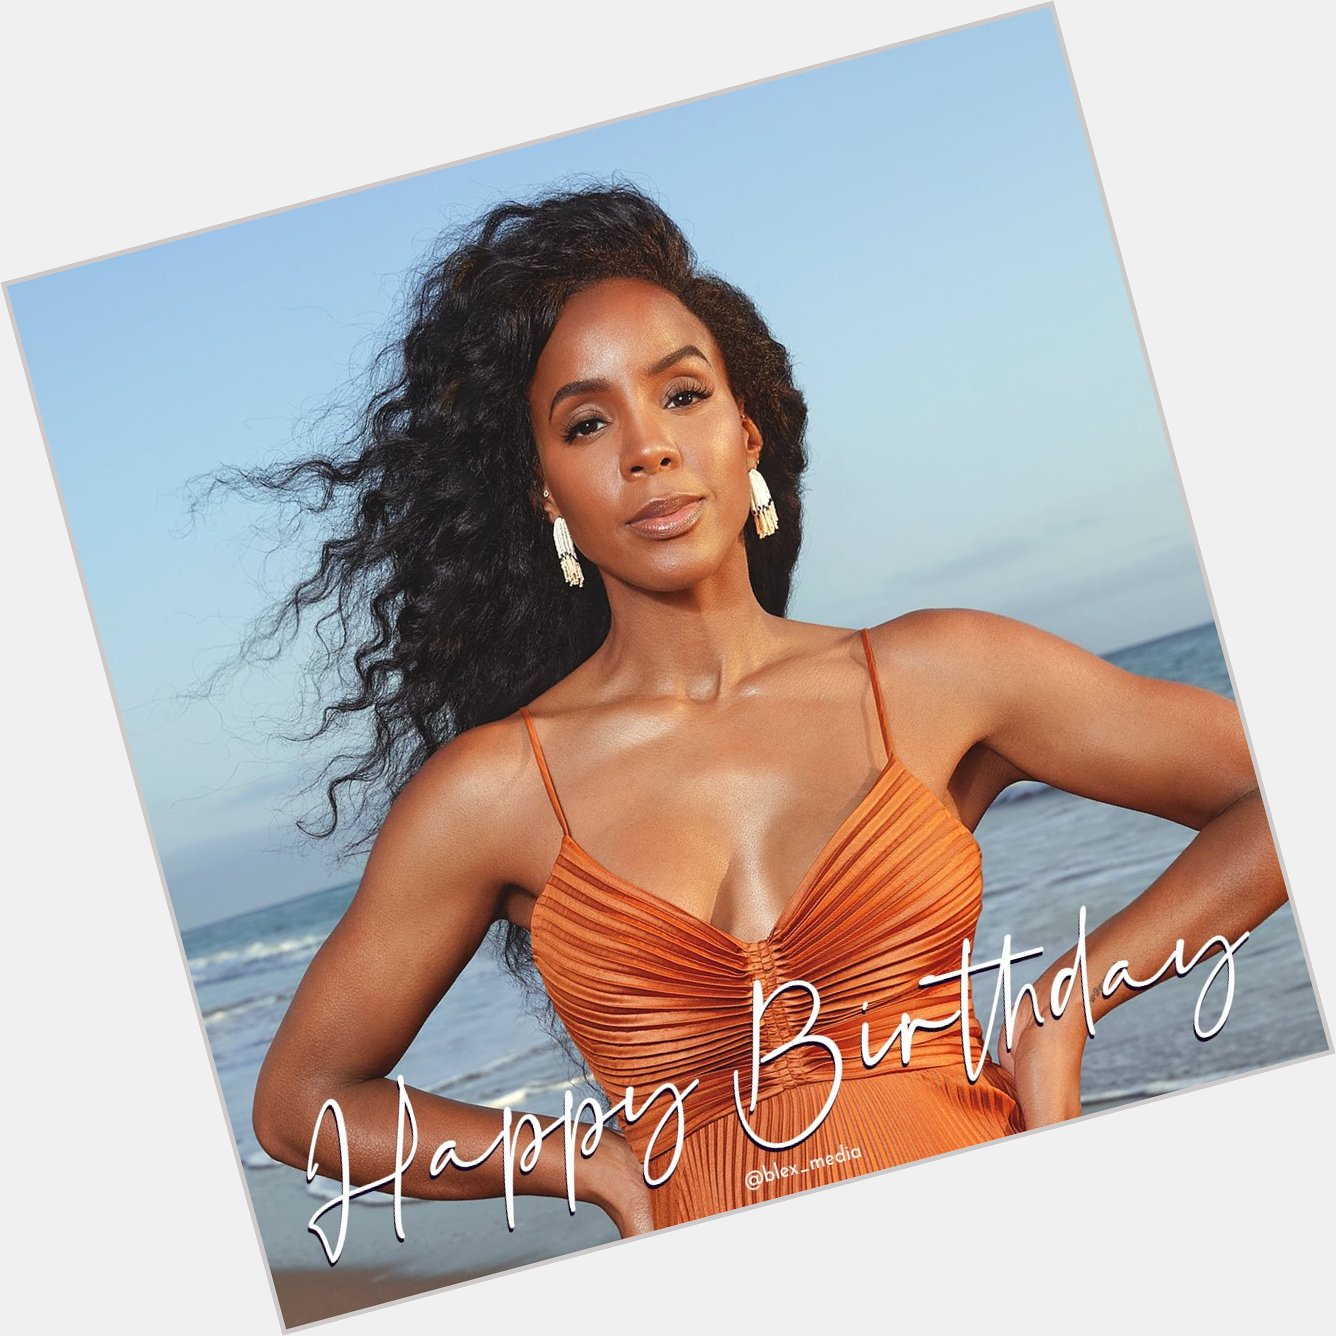 Happy Birthday, Kelly Rowland! What\s your favorite movie or TV role of hers? 